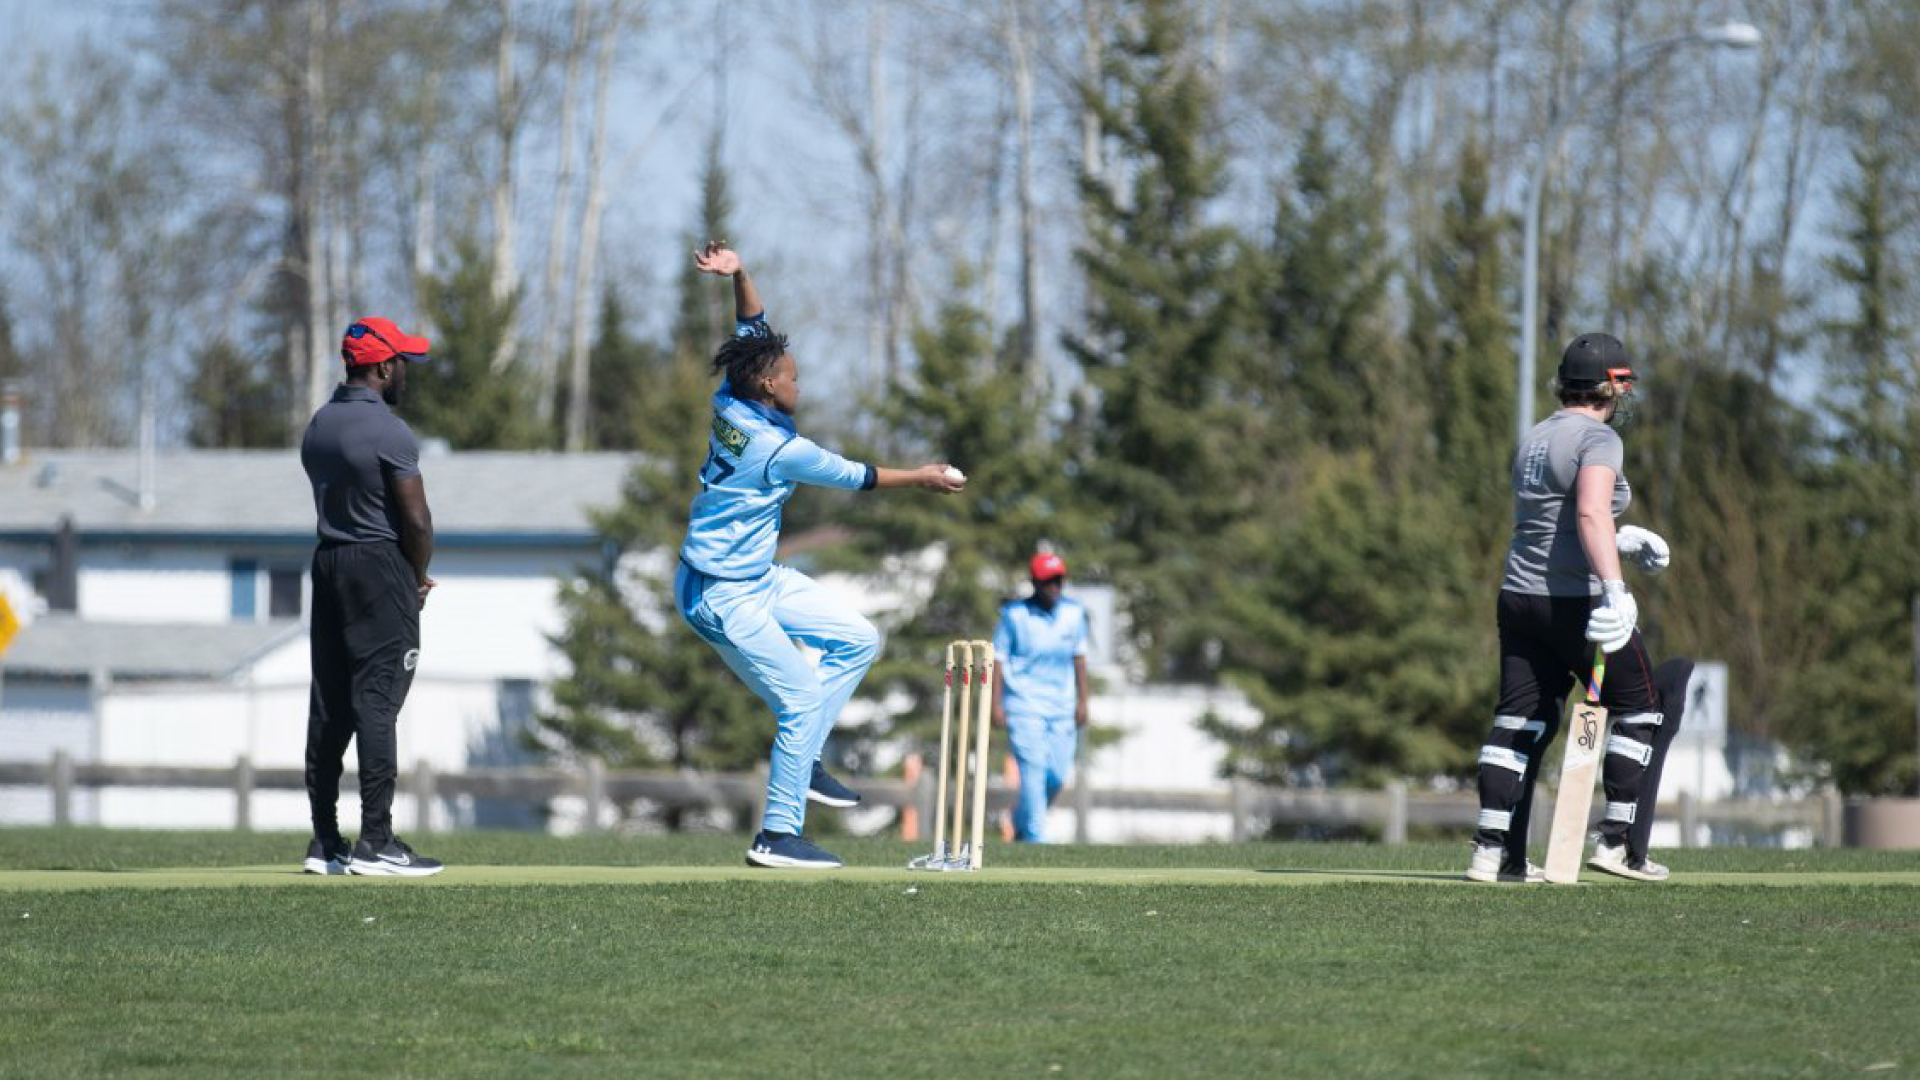 Quartet of Women's Cricket Huskies to compete at Commonwealth Games